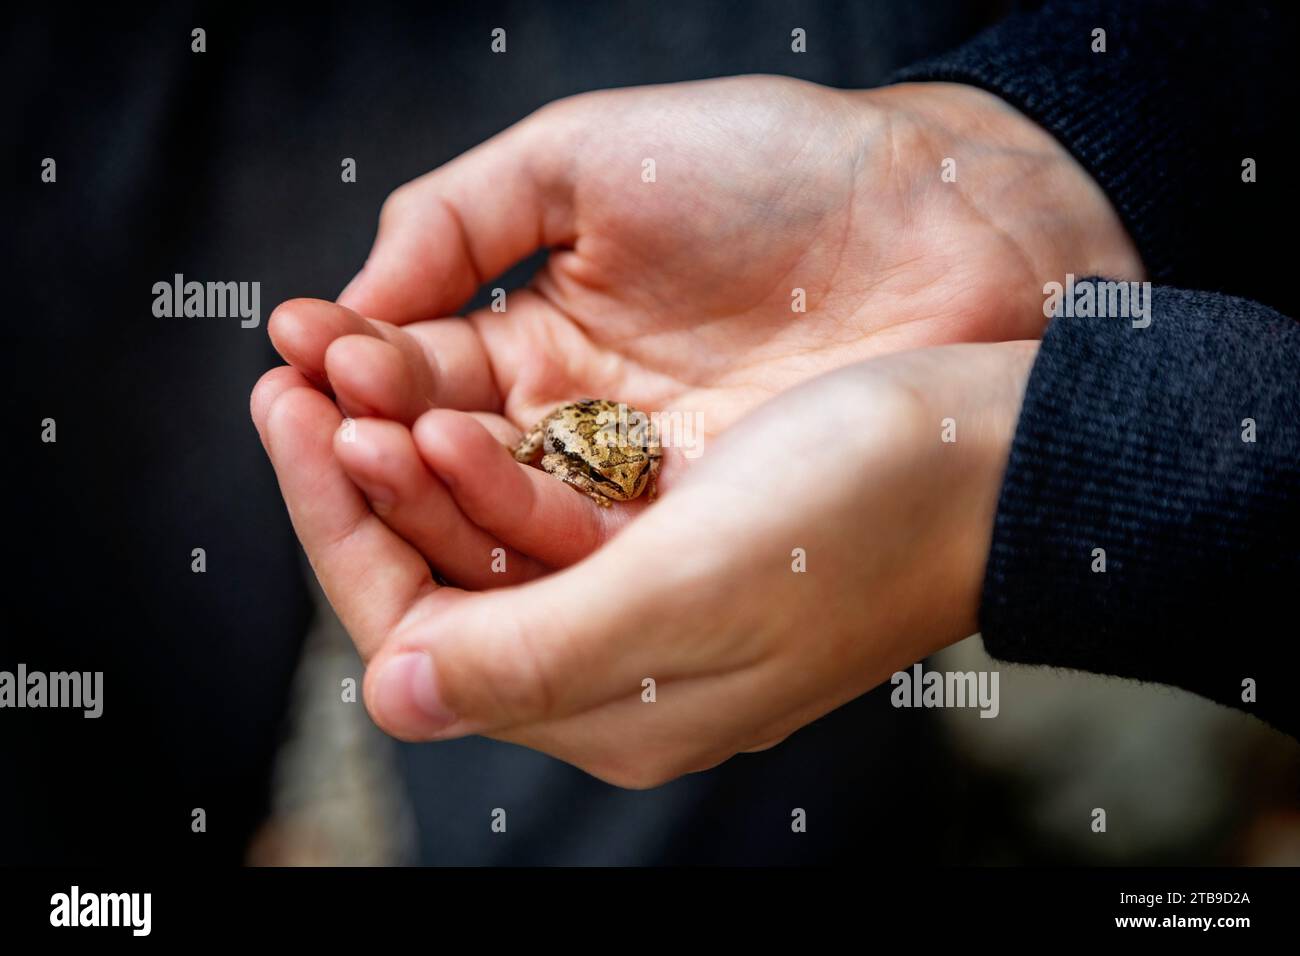 Close-up of the hands of a young boy holding a small frog while on vacation; Sicamous, British Columbia, Canada Stock Photo